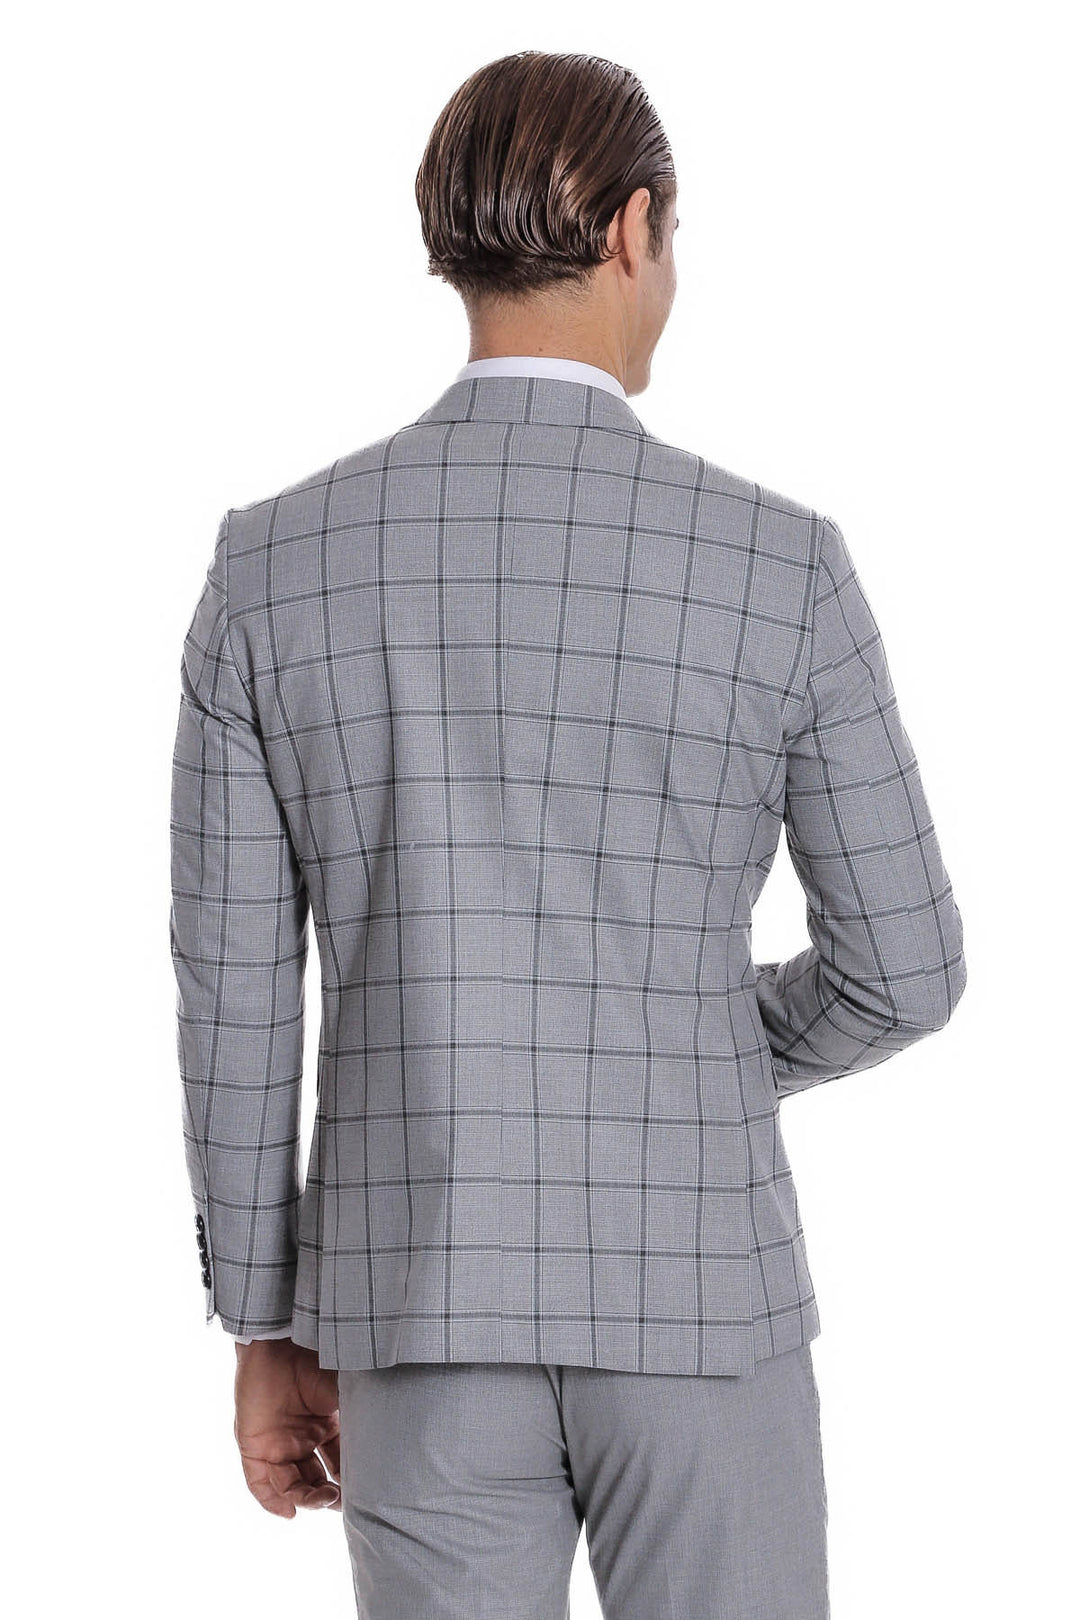 Checked Patterned Slim Fit Grey Men Suit - Wessi